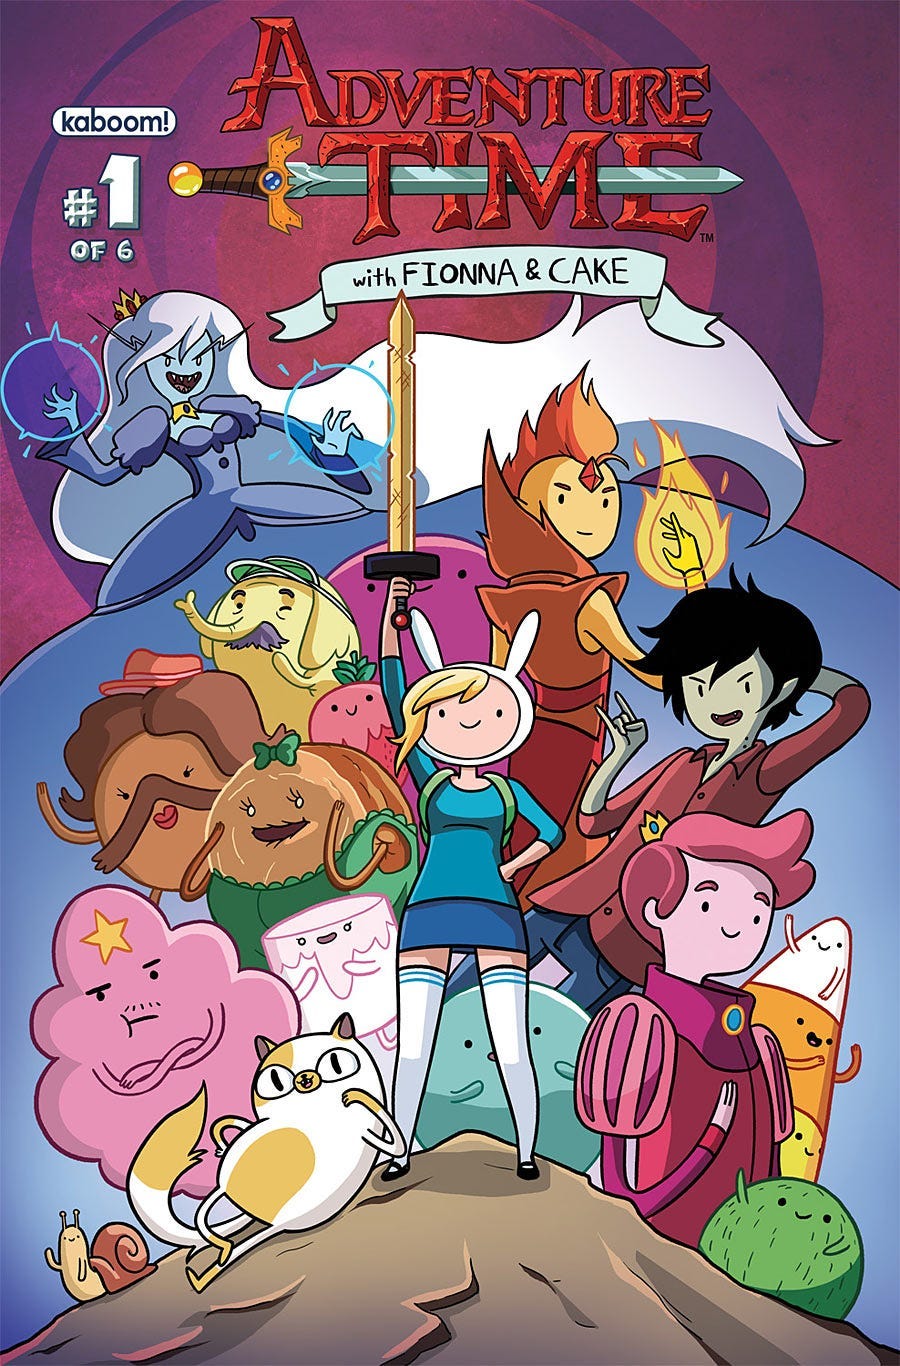 Adventure Time With Fionna and Cake #6 by Natasha Allegri